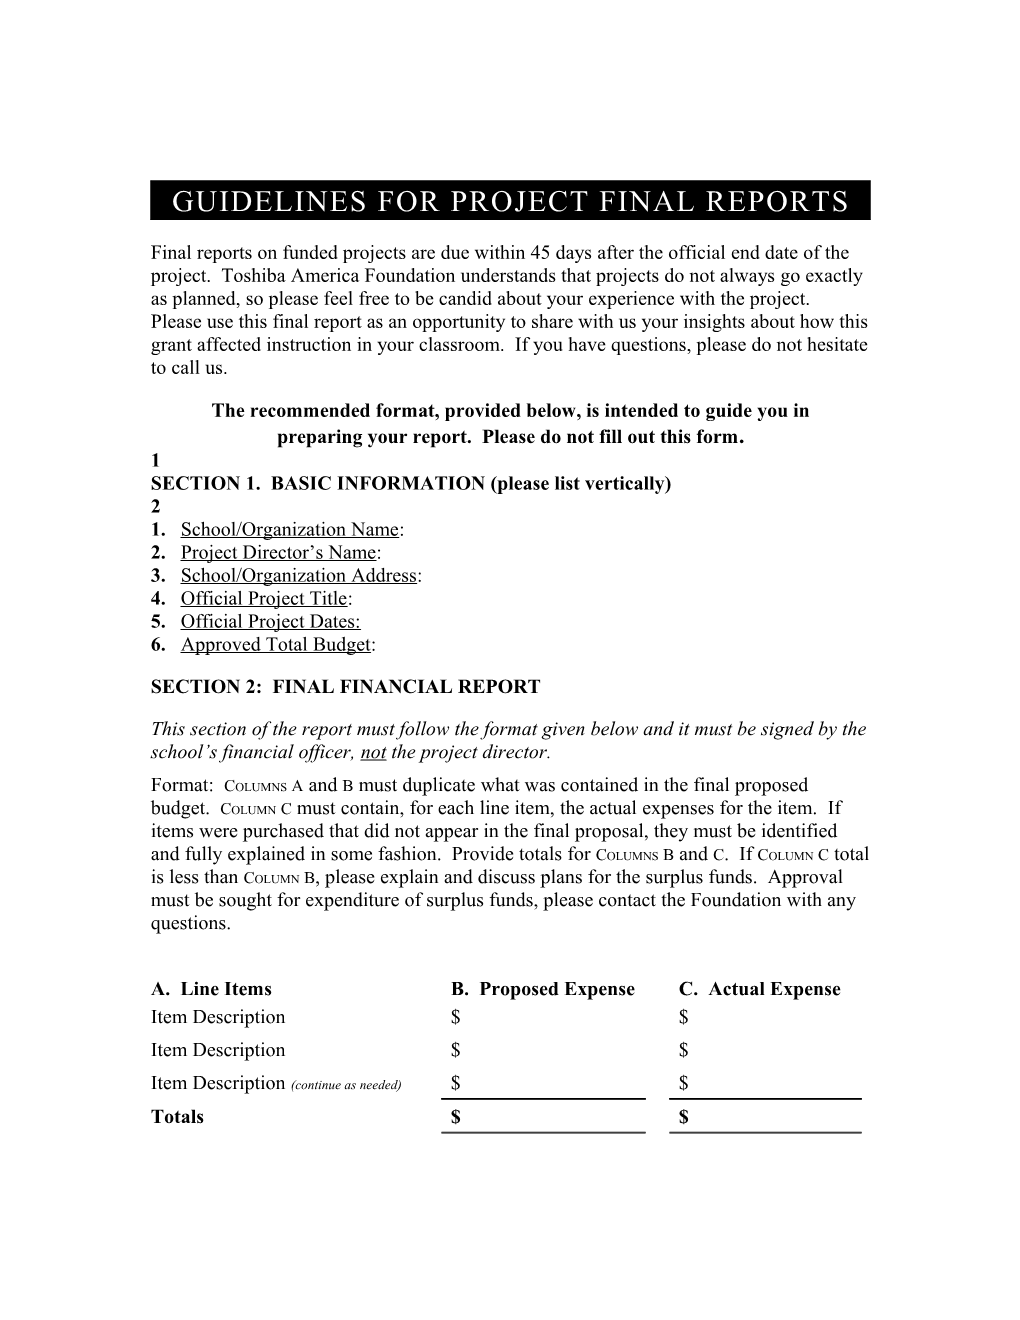 Guidelines for Project Final Reports